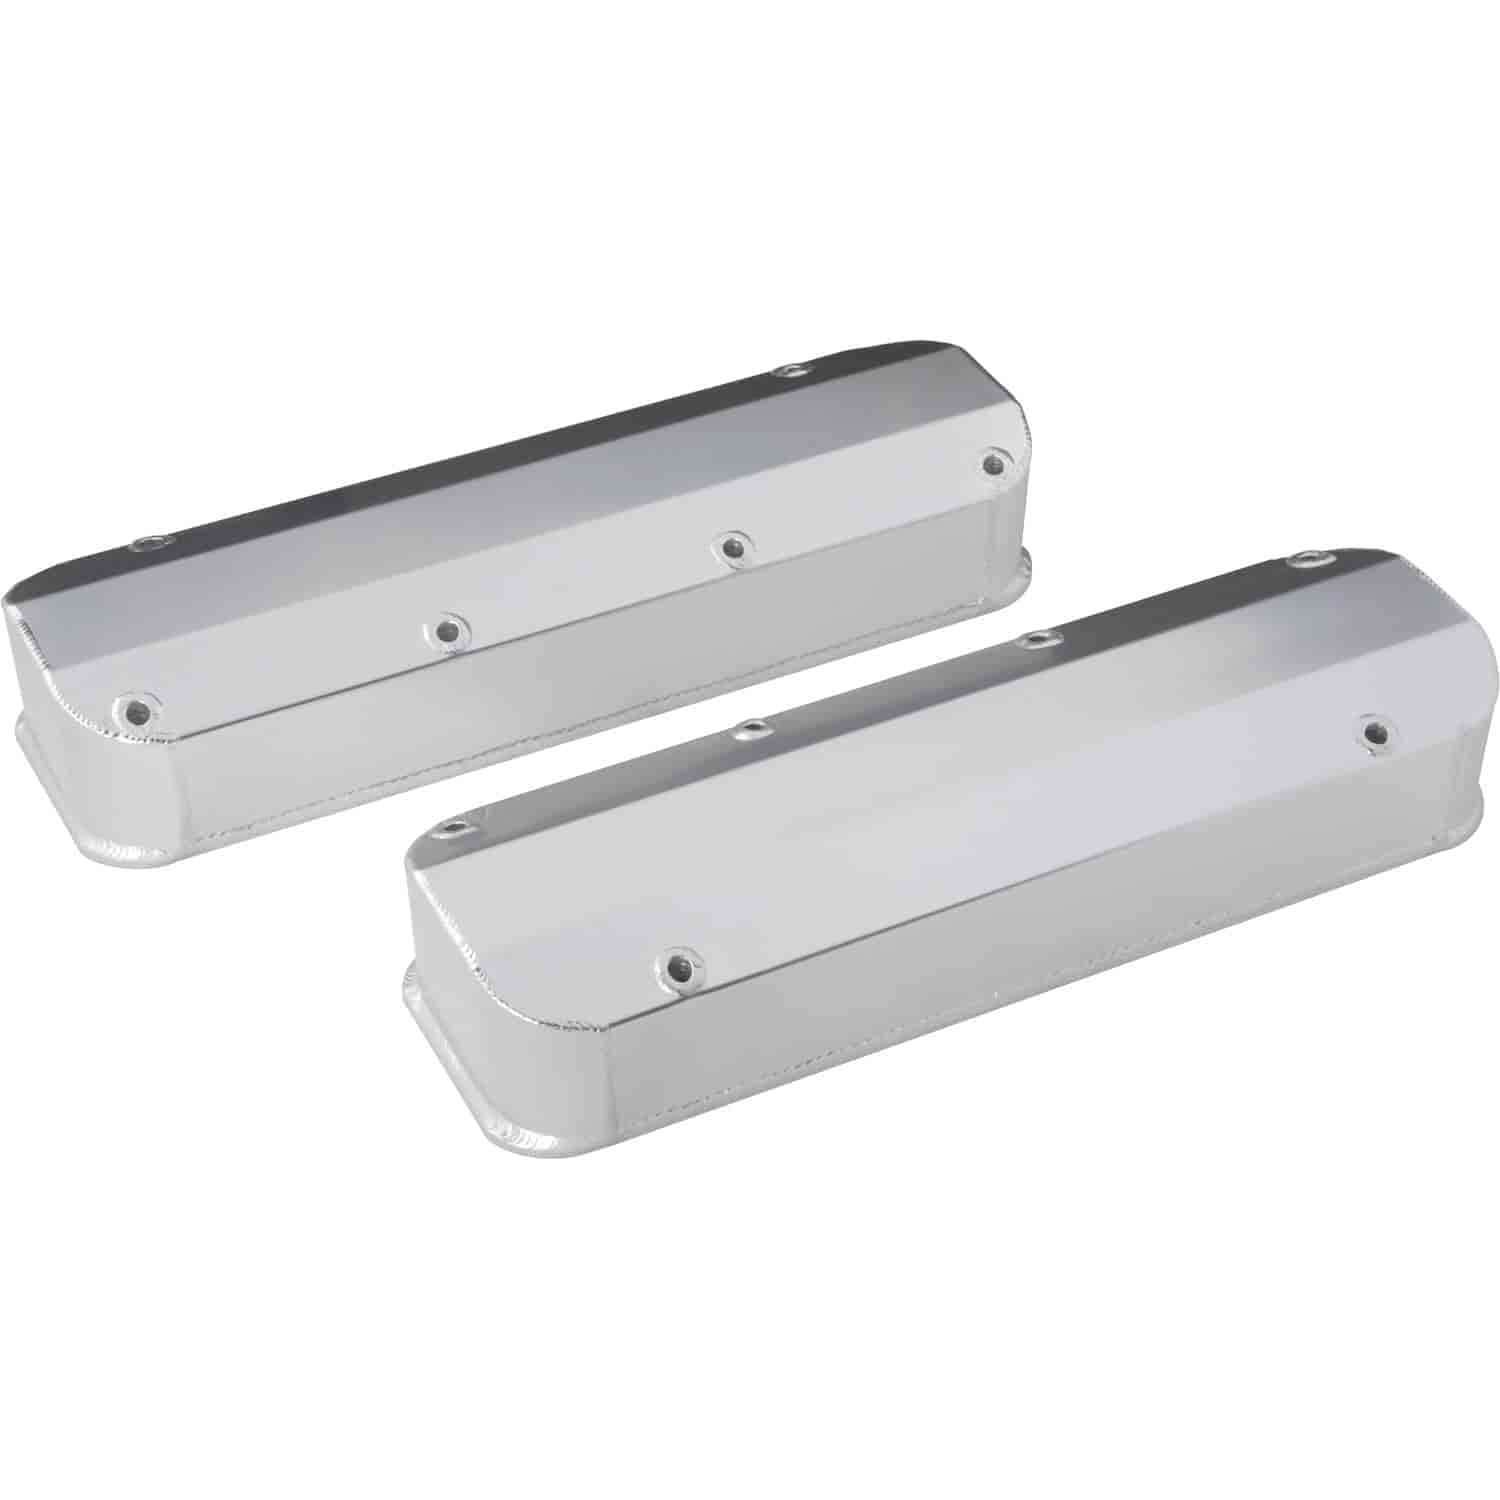 Fabricated Aluminum Valve Covers for Big Block Ford 429-460